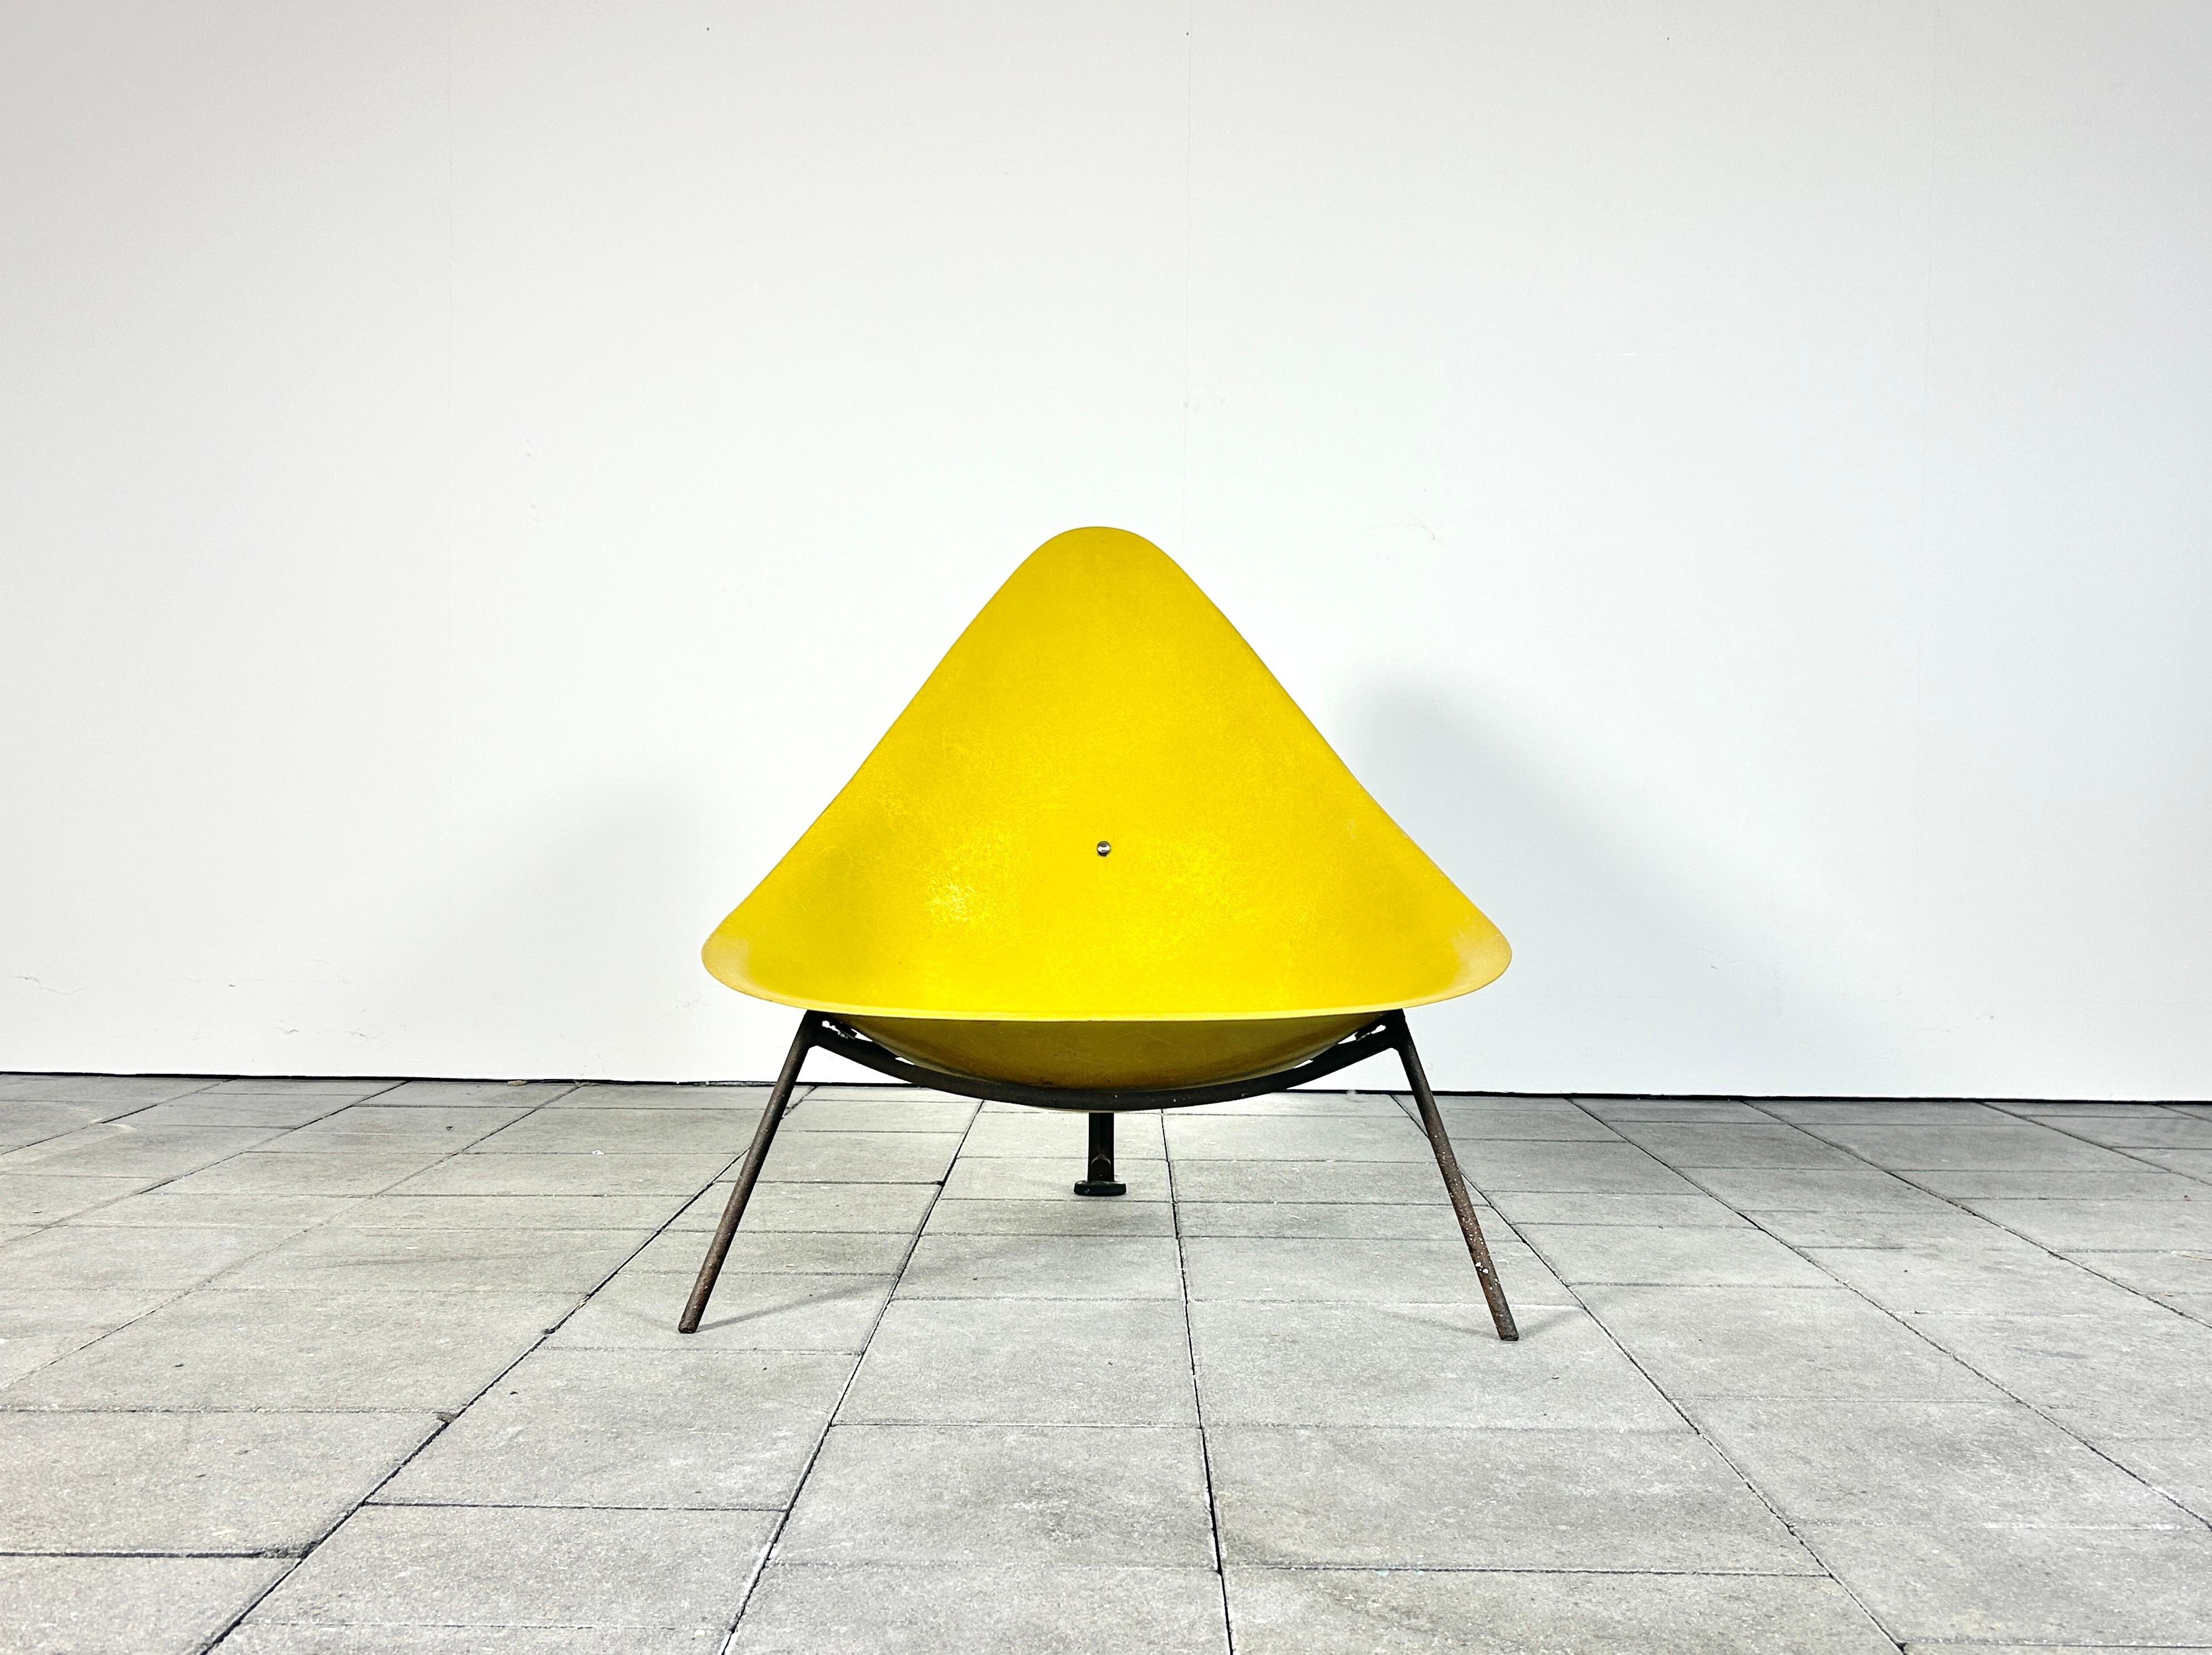 Yellow fiberglass Merat tripod lounge chair designed by Ed Merat, France 1956

original 1950ies edition of the Merat tripod lounge chair

The chair has a beautiful yellow translucent fiberglass seat shell with strong fiber structure clearly visible.